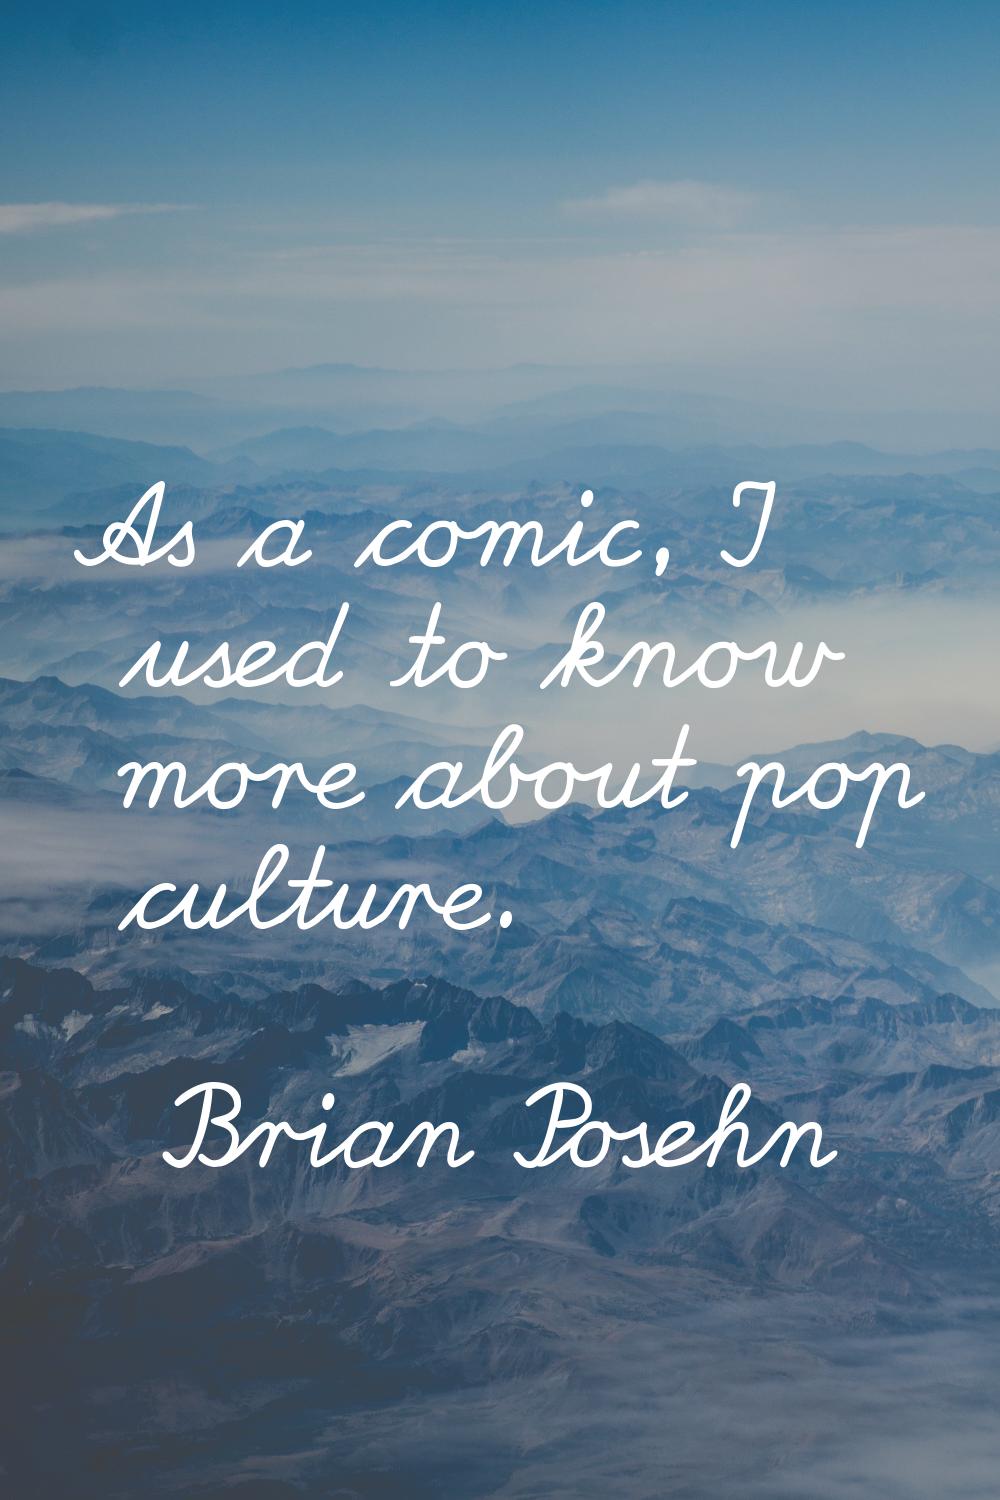 As a comic, I used to know more about pop culture.